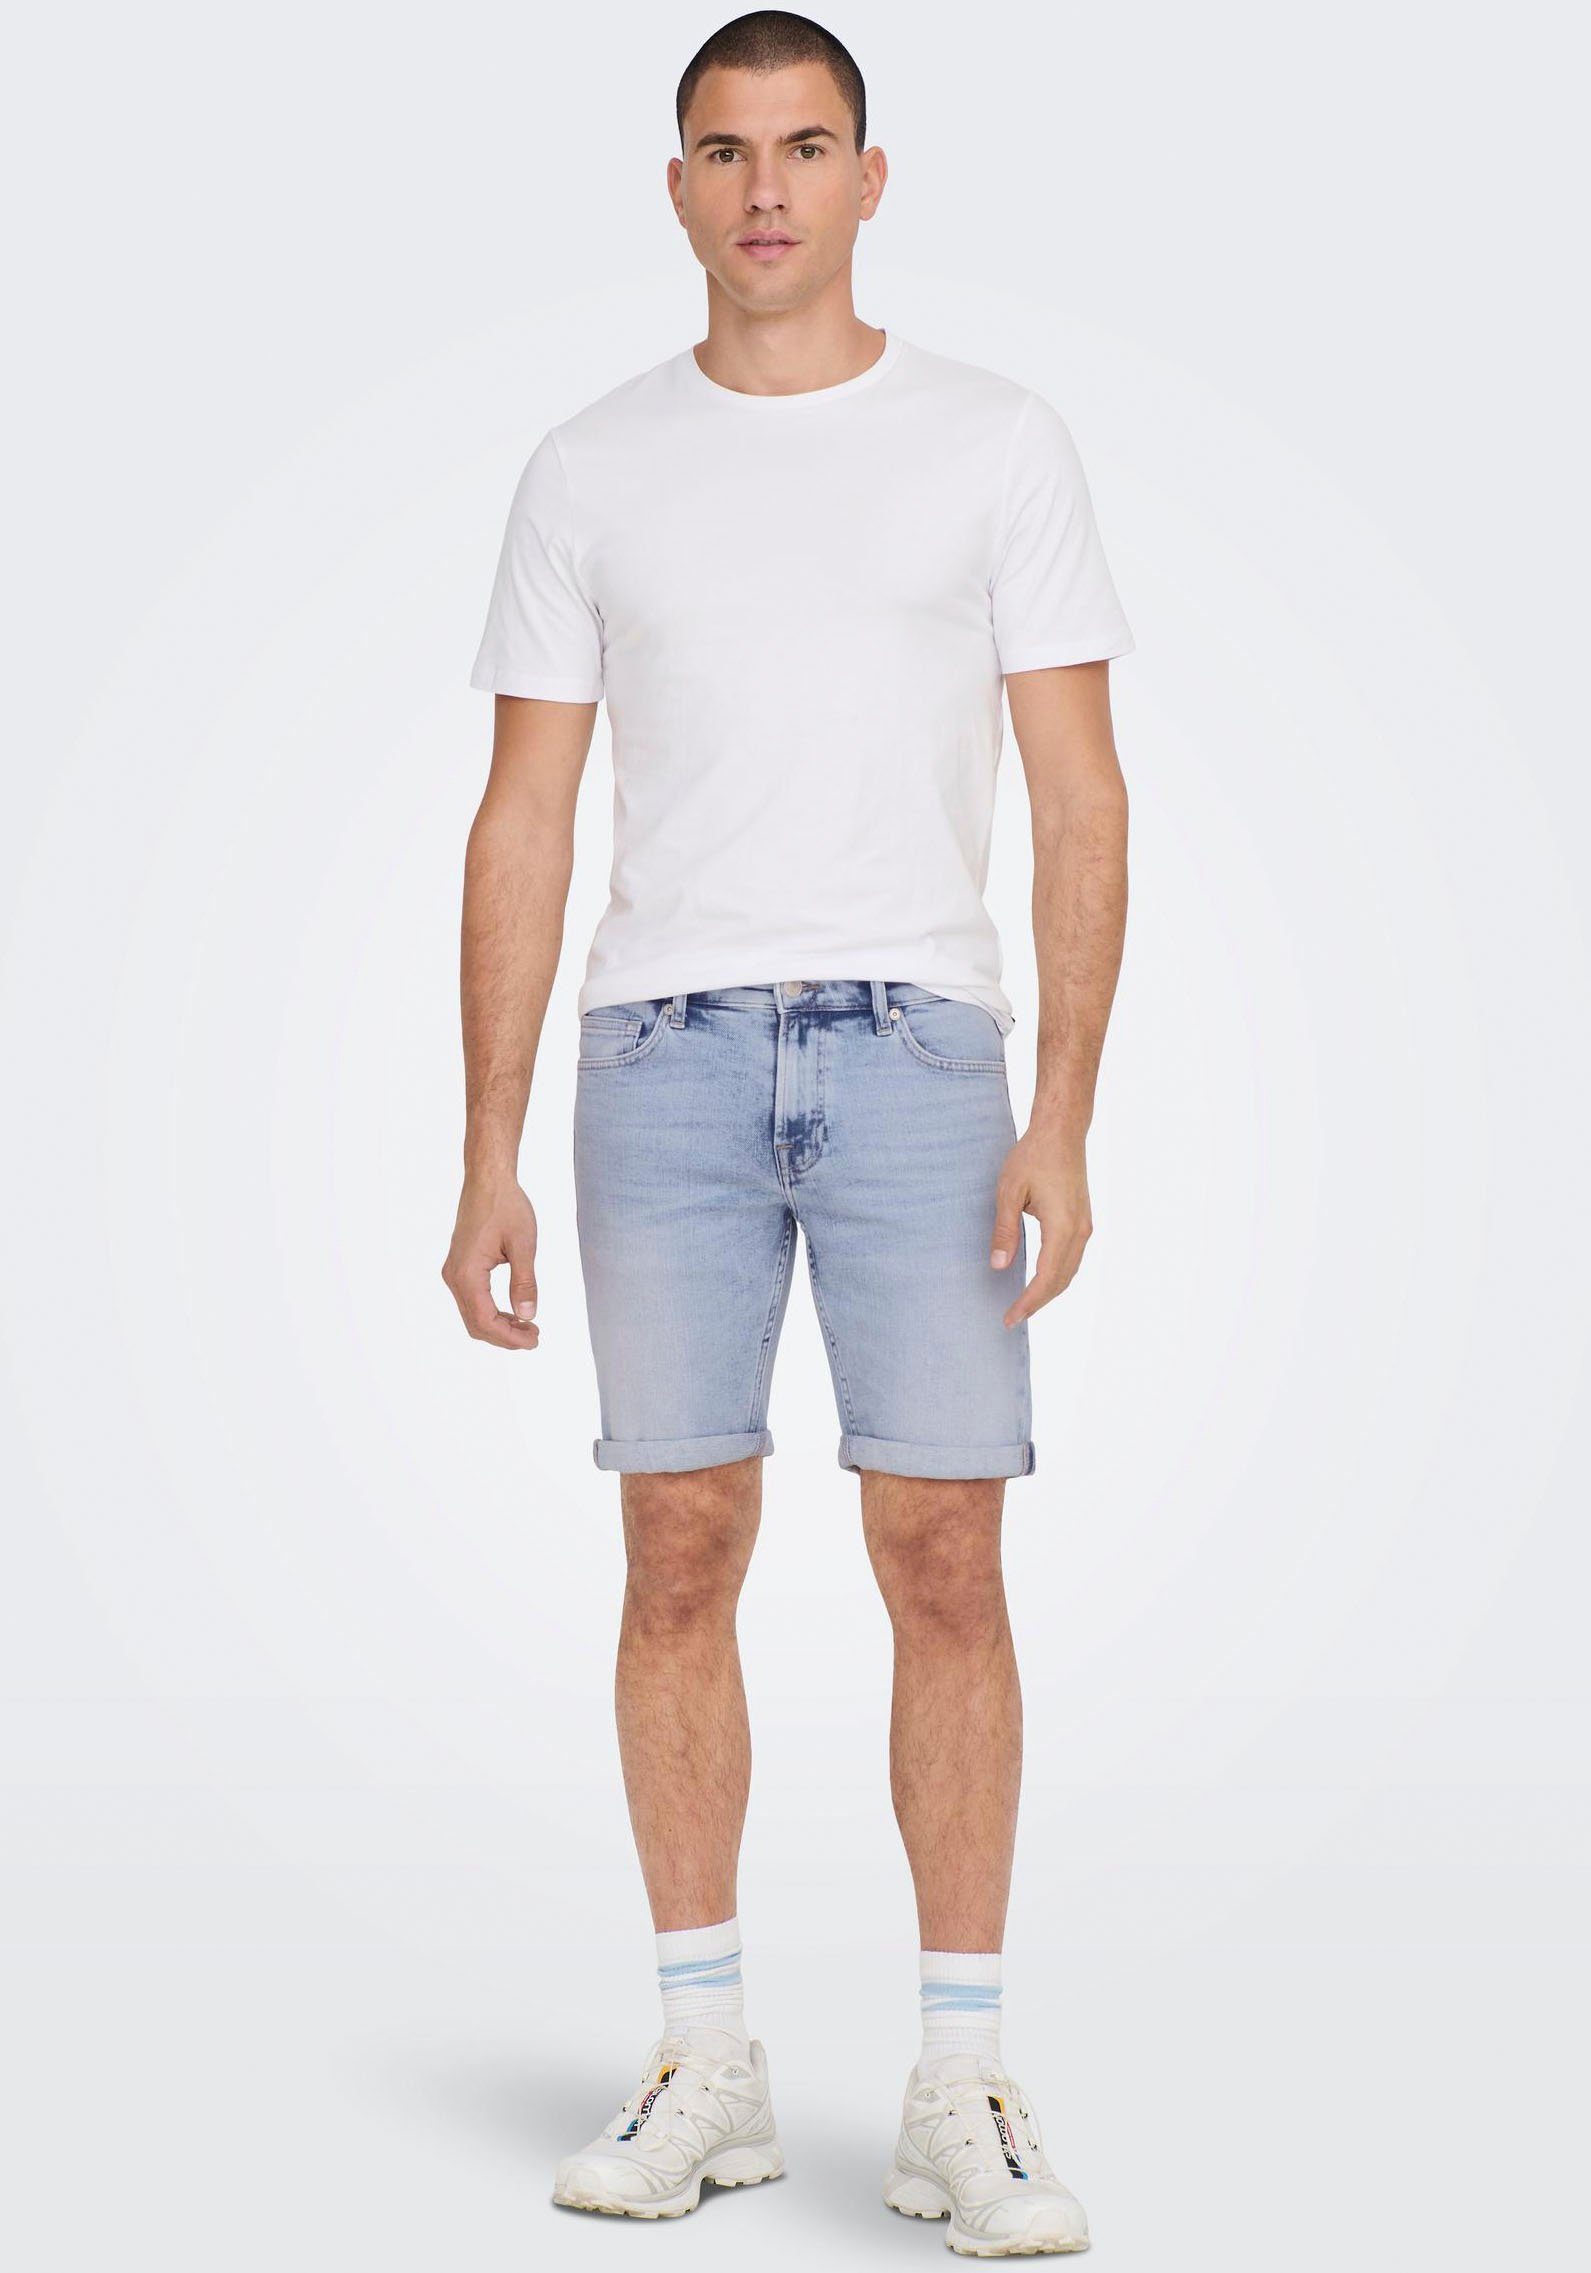 SONS Blue DNM LIGHT Jeansshorts Light SHORTS ONSPLY 5189 BLUE & NOOS ONLY Denim